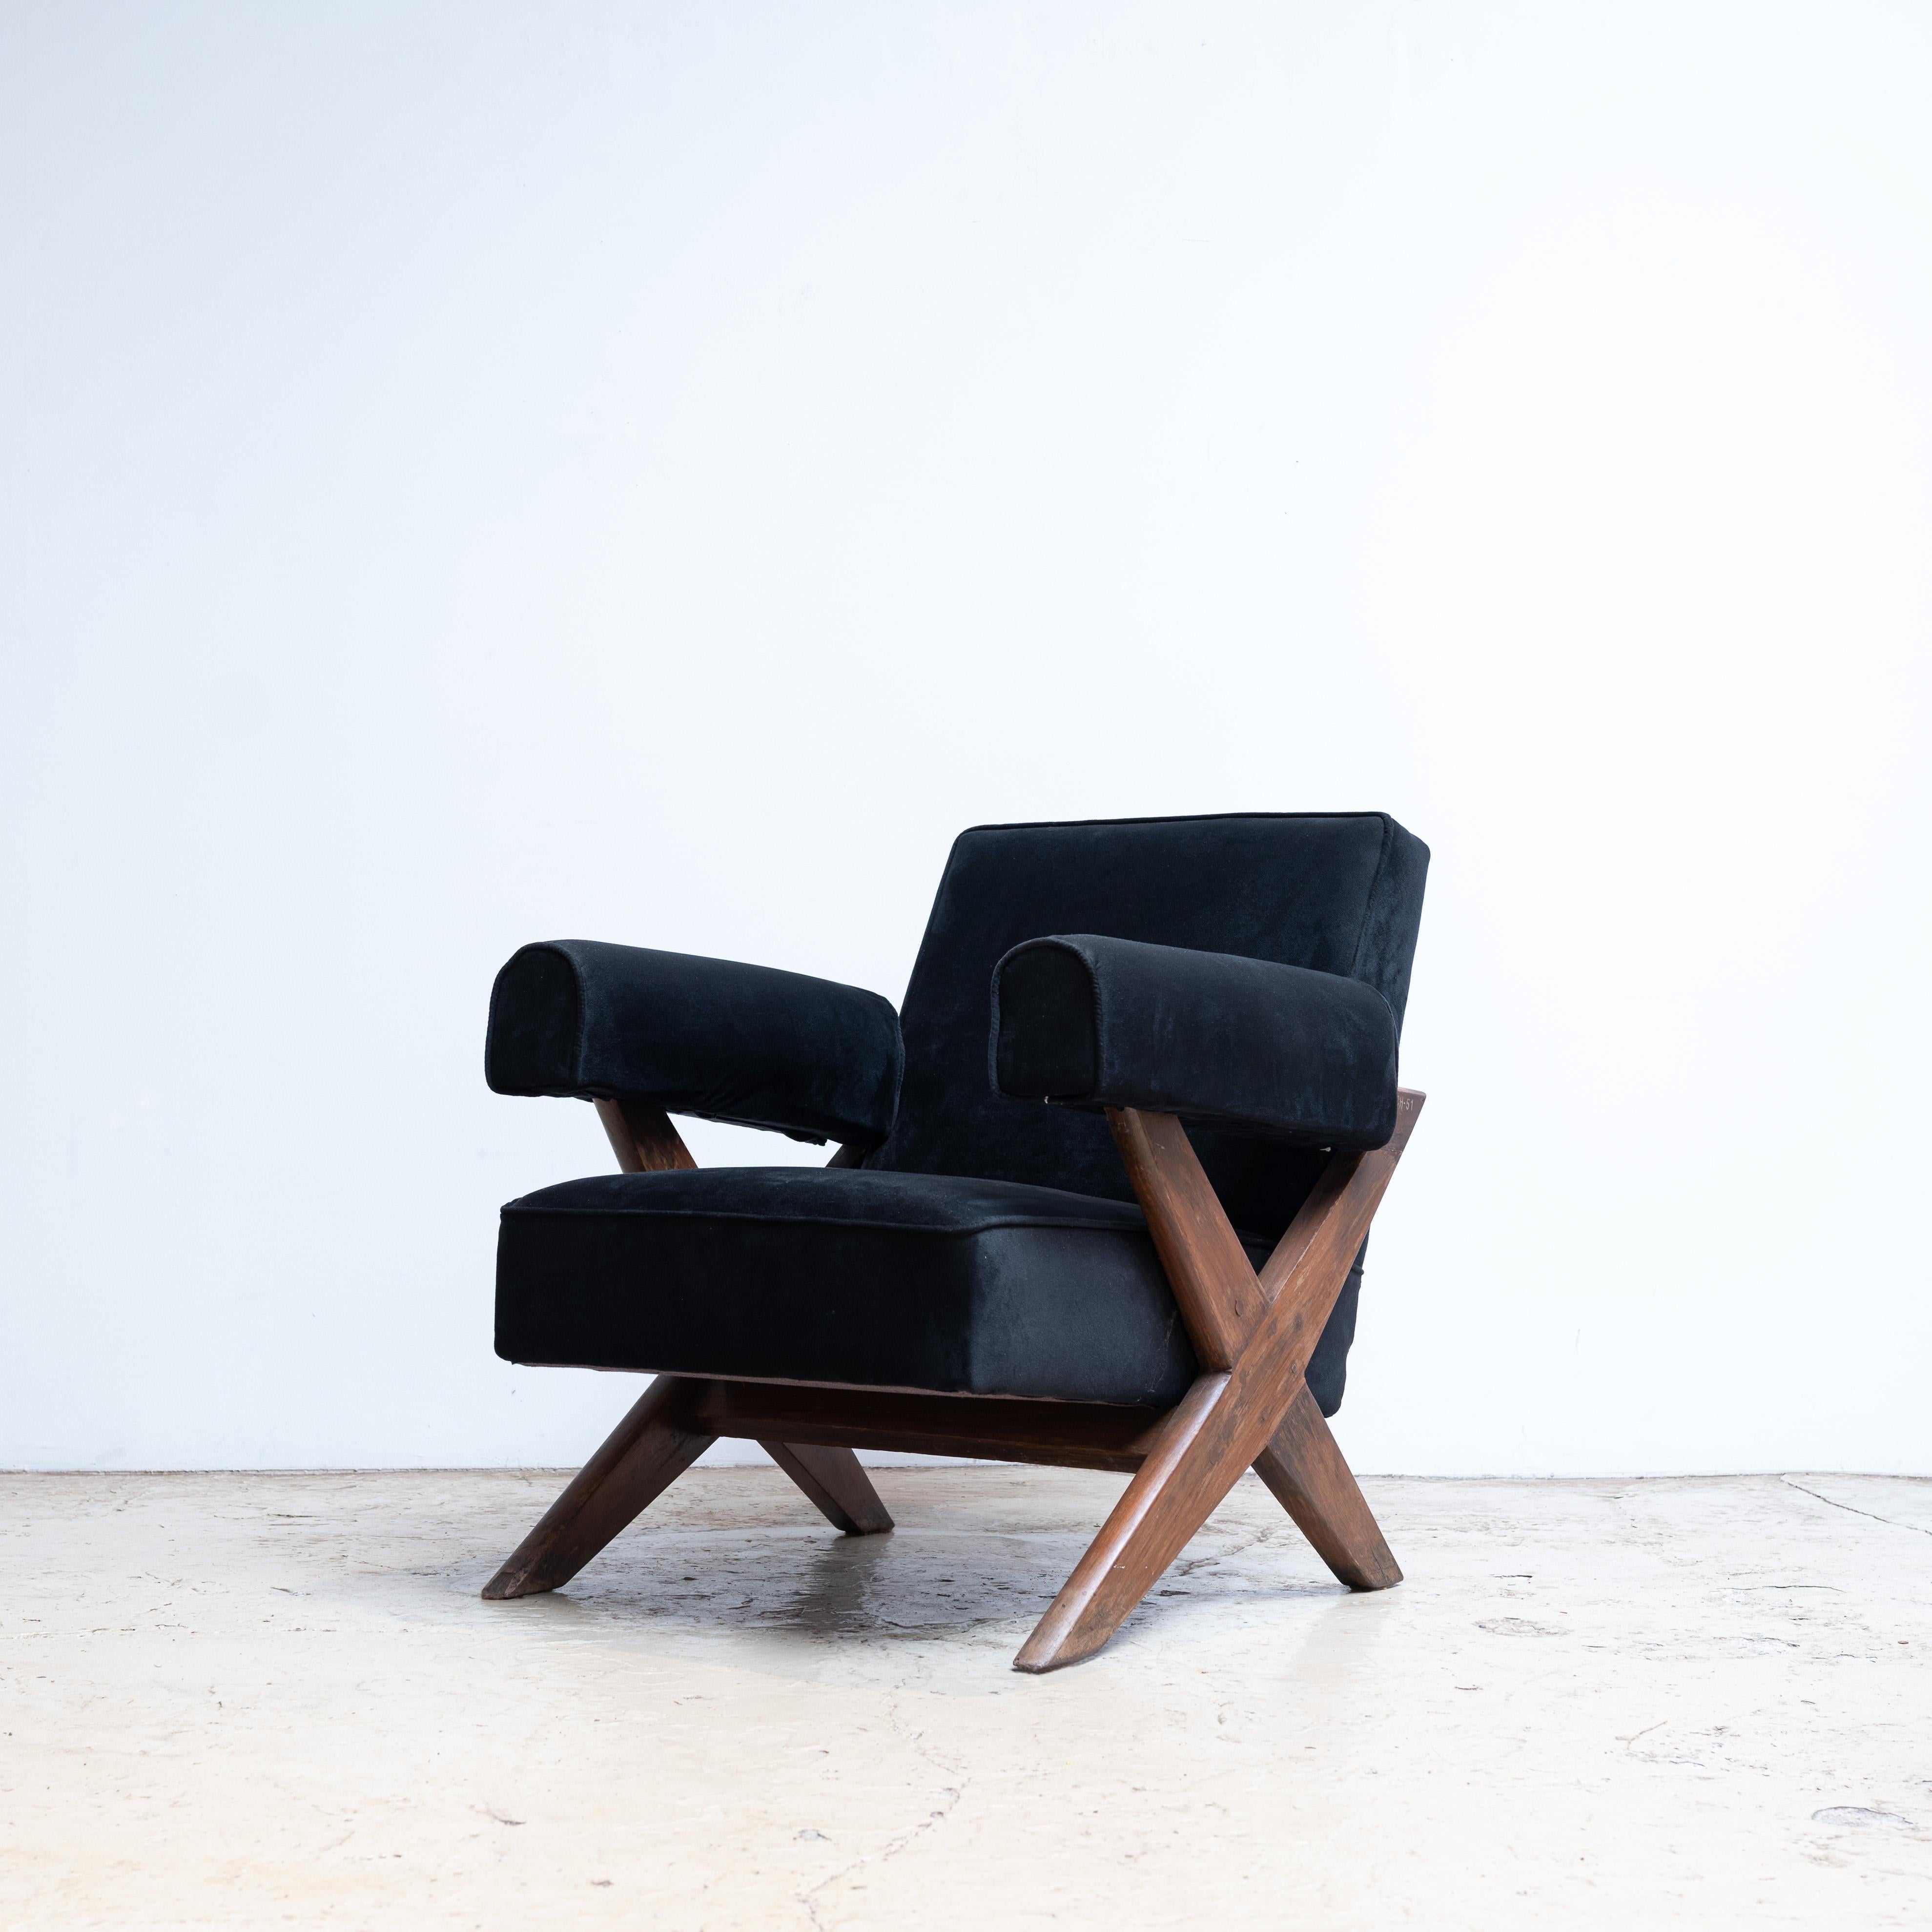 Pierre Jeanneret X-Leg Upholstered Lounge Chair, Circa 1960, Chandigarh, India For Sale 1